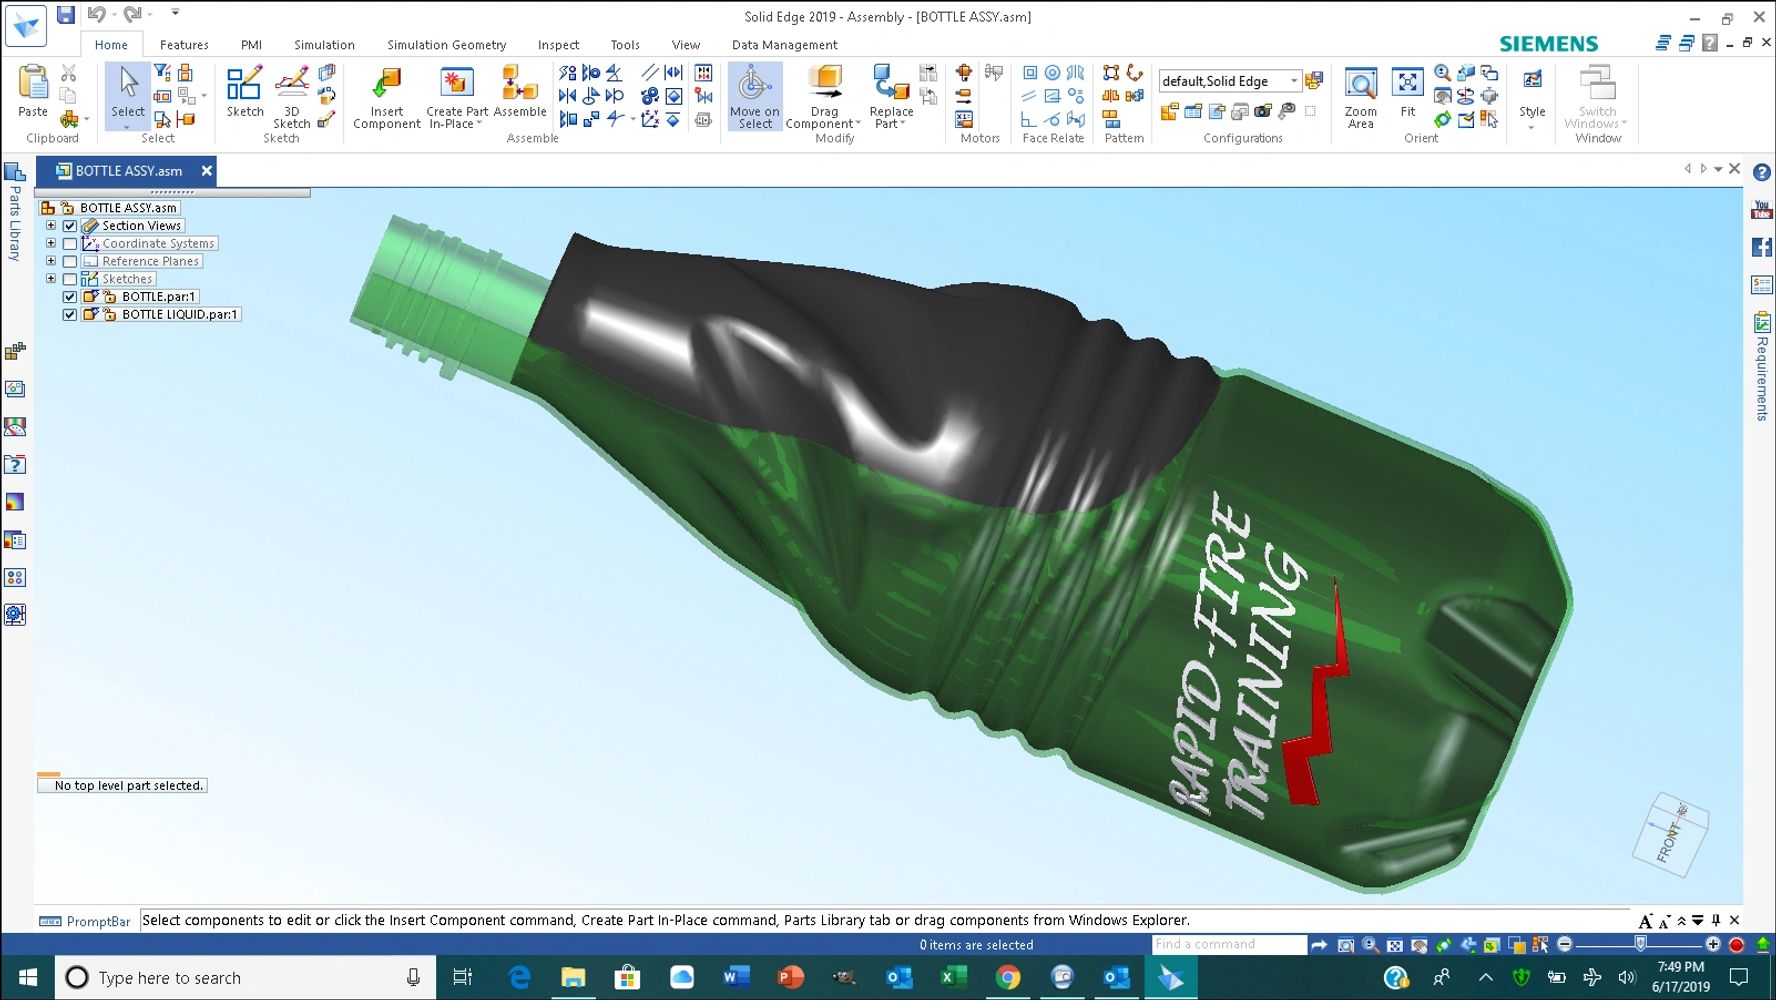 Drink bottle design with liquid using Solid Edge.